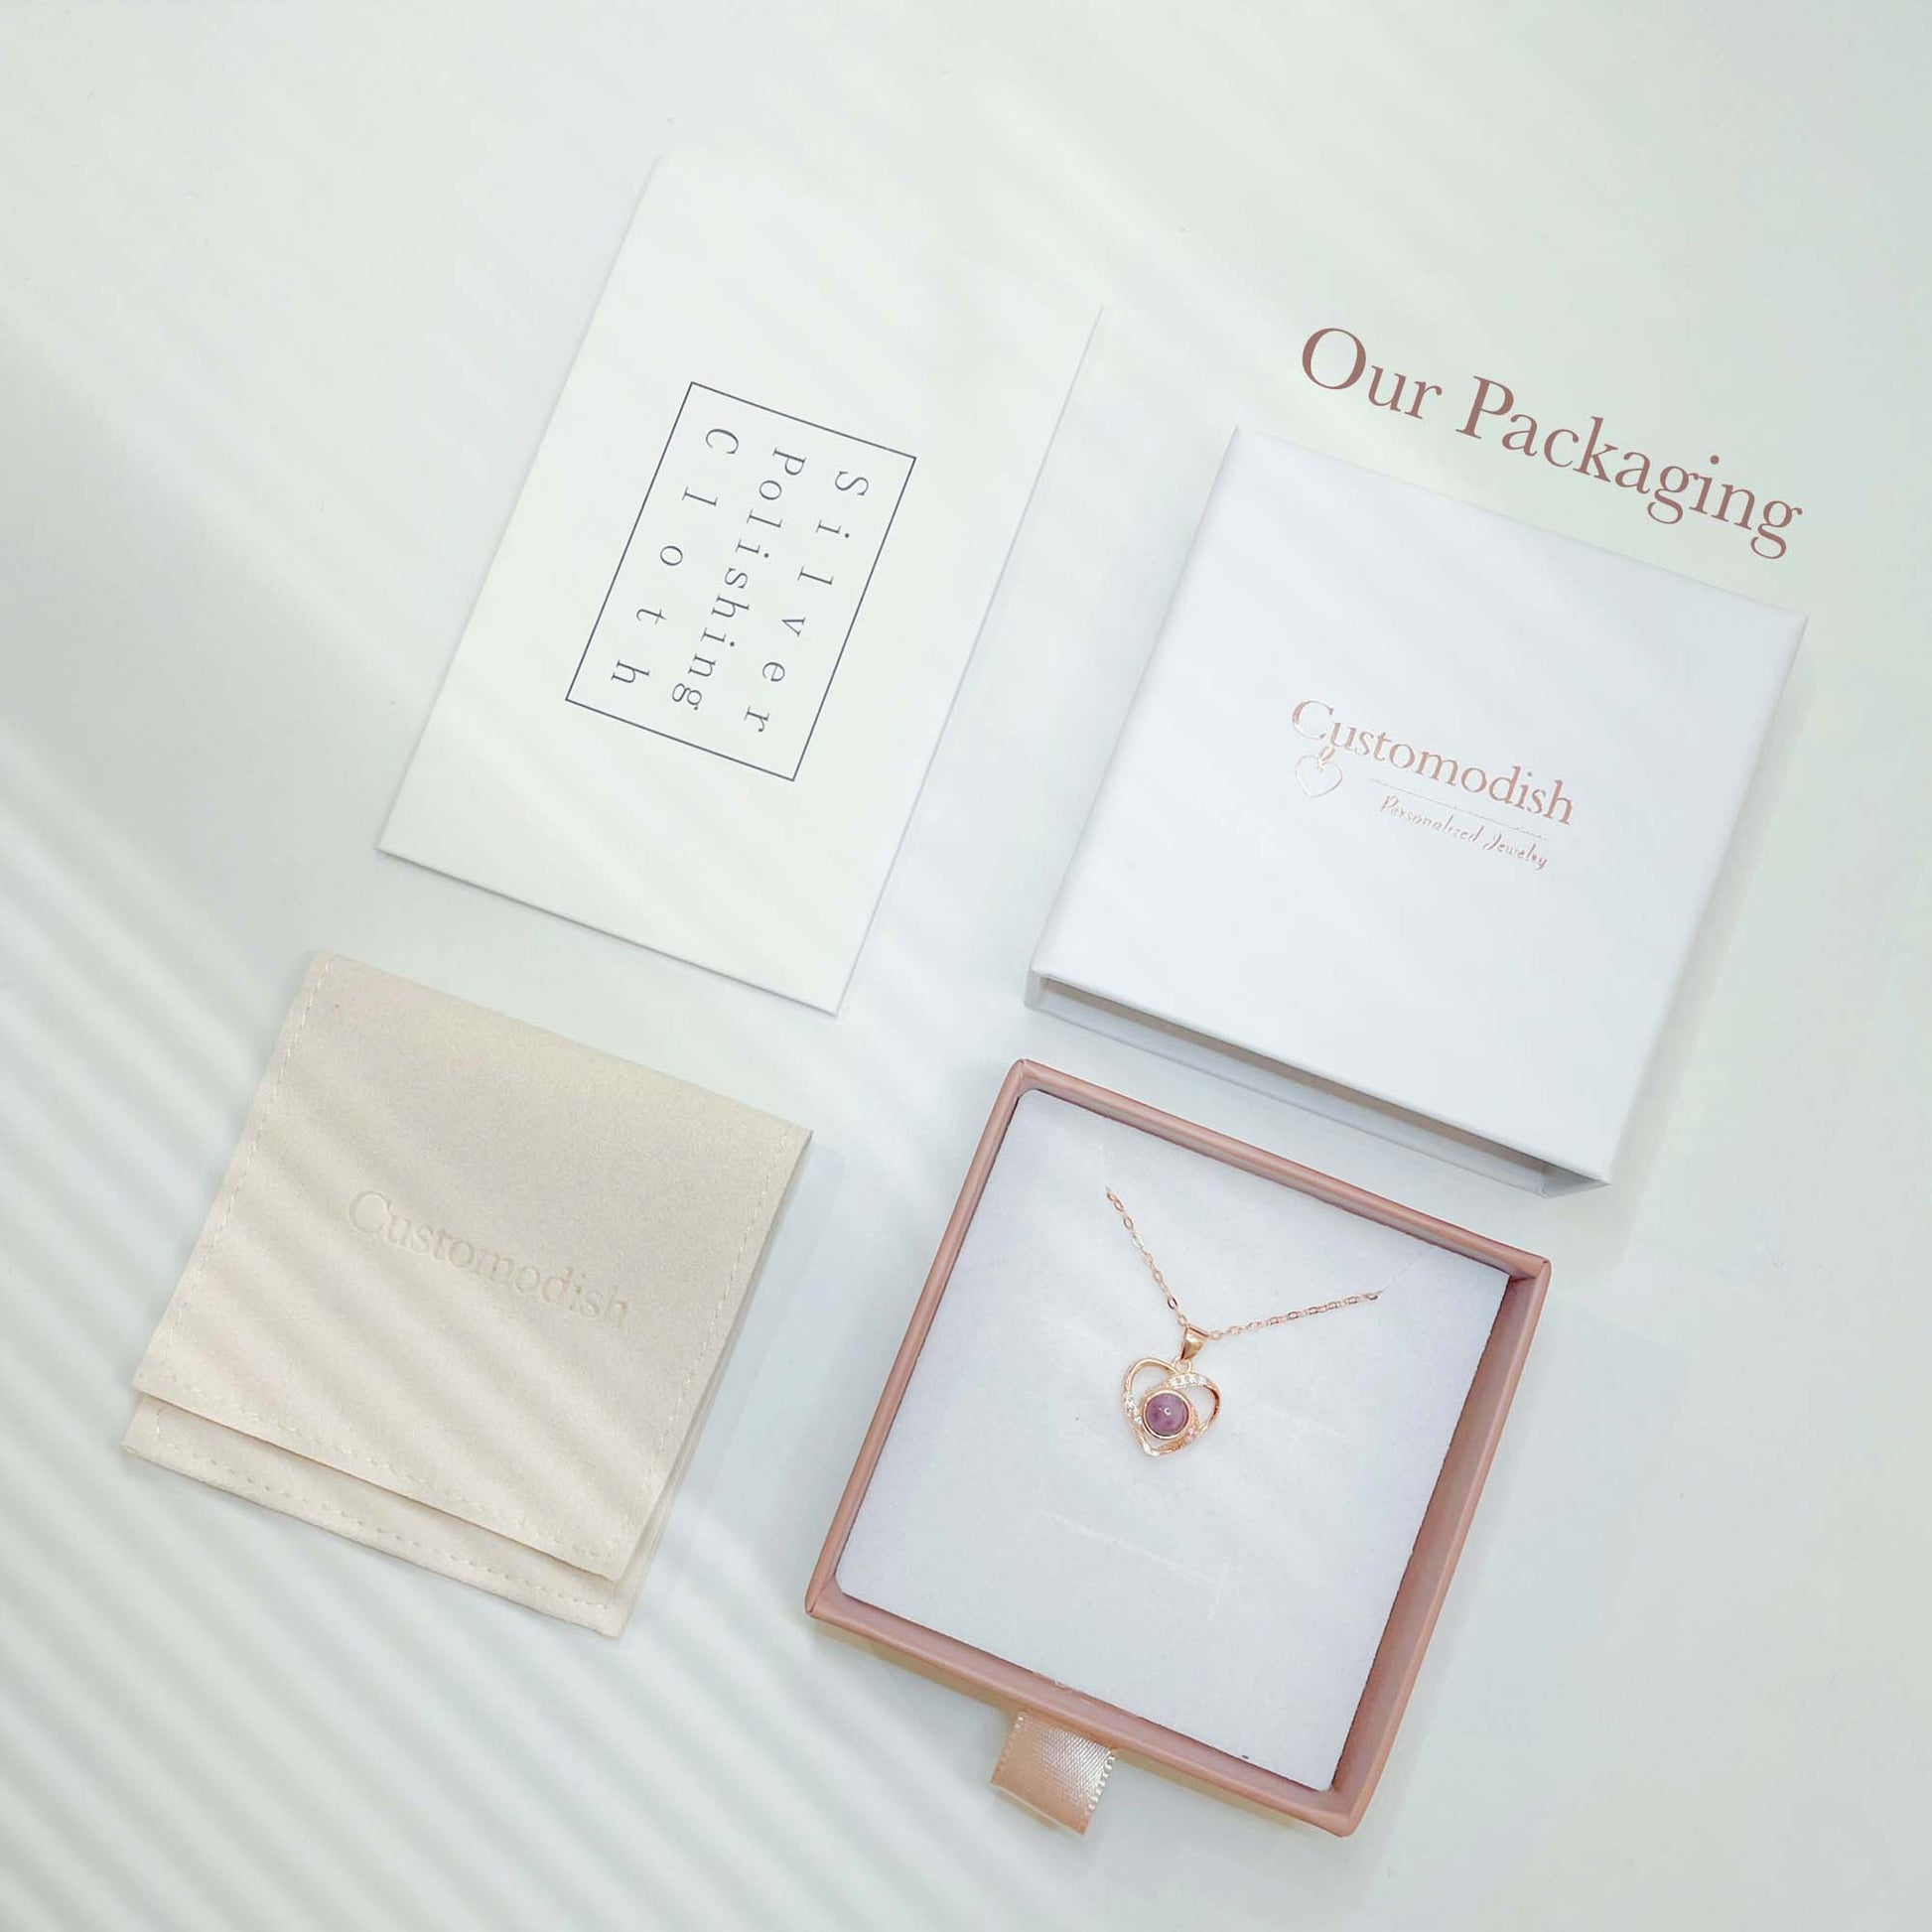 We carefully pack your precious jewelry with our specially designed jewelry packaging